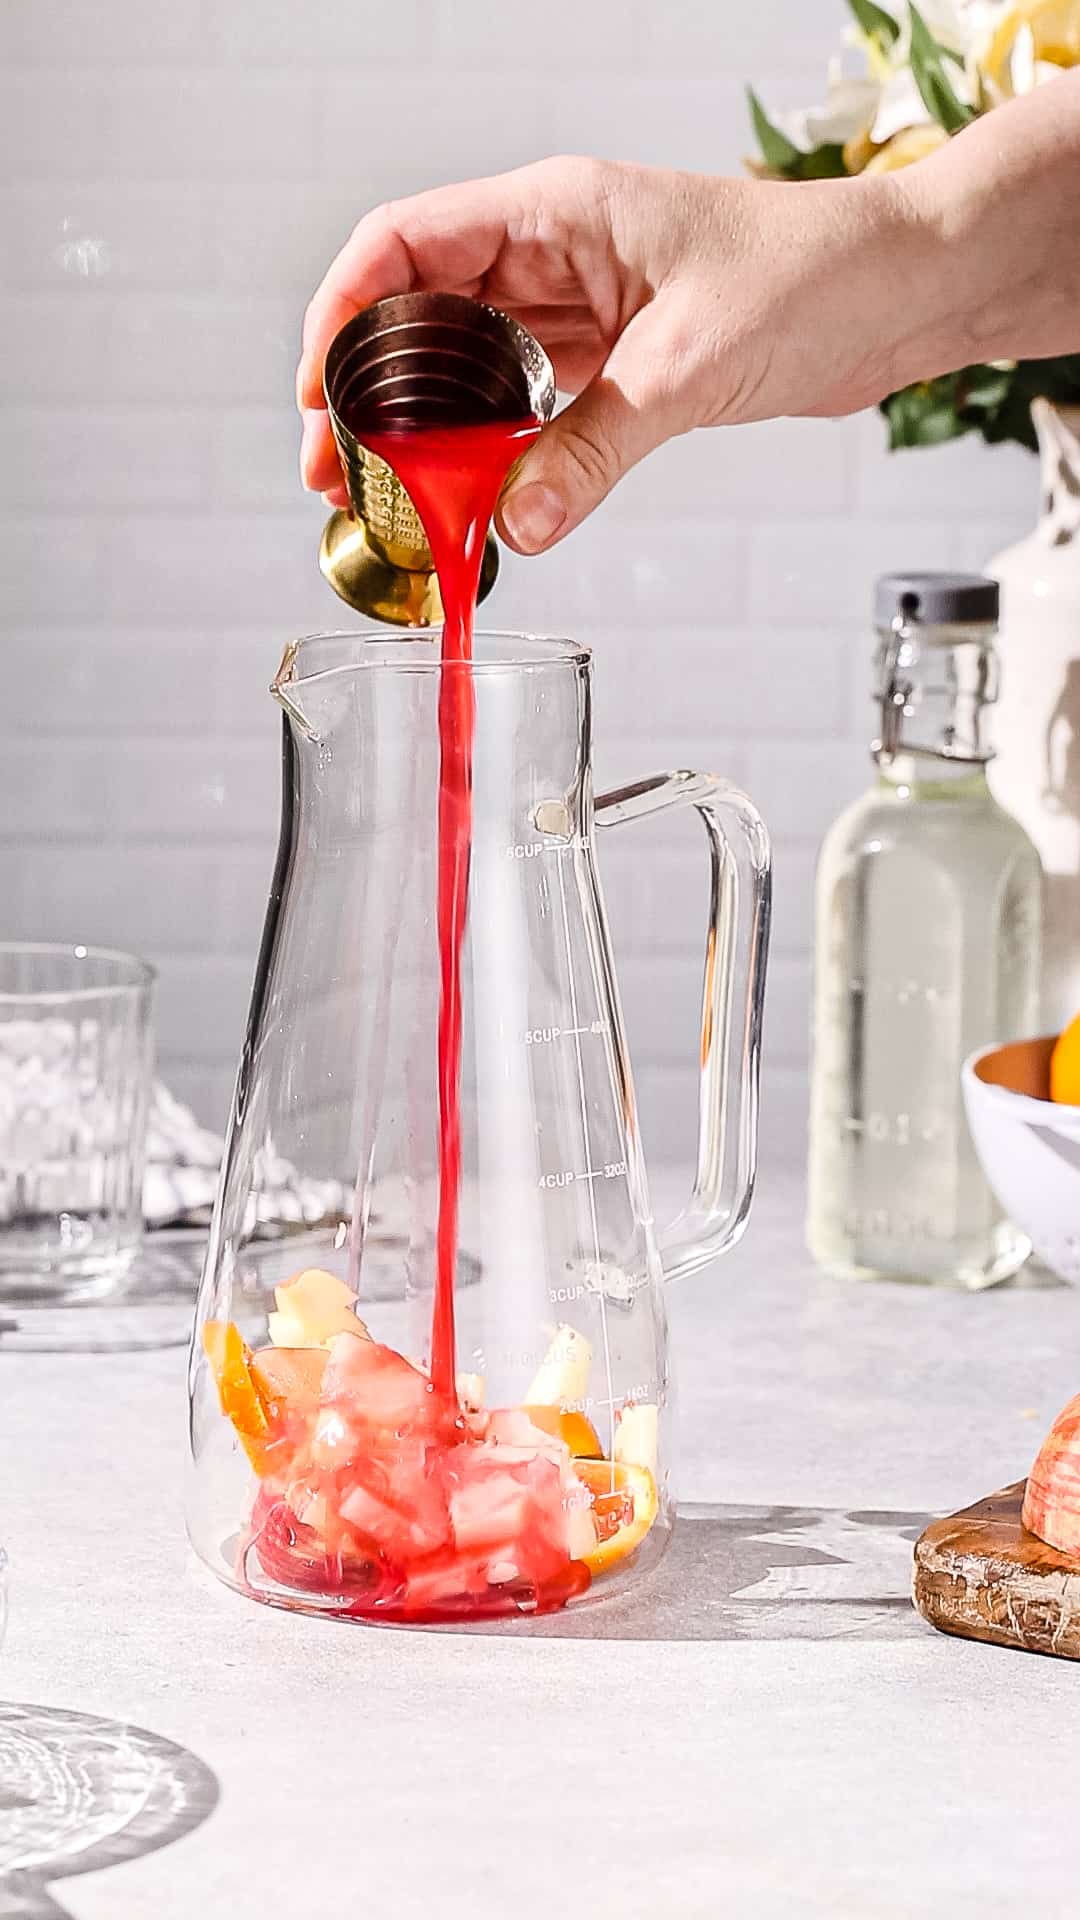 Hand using a large jigger to add a red colored juice to a glass pitcher that has cut up fruit at the bottom.